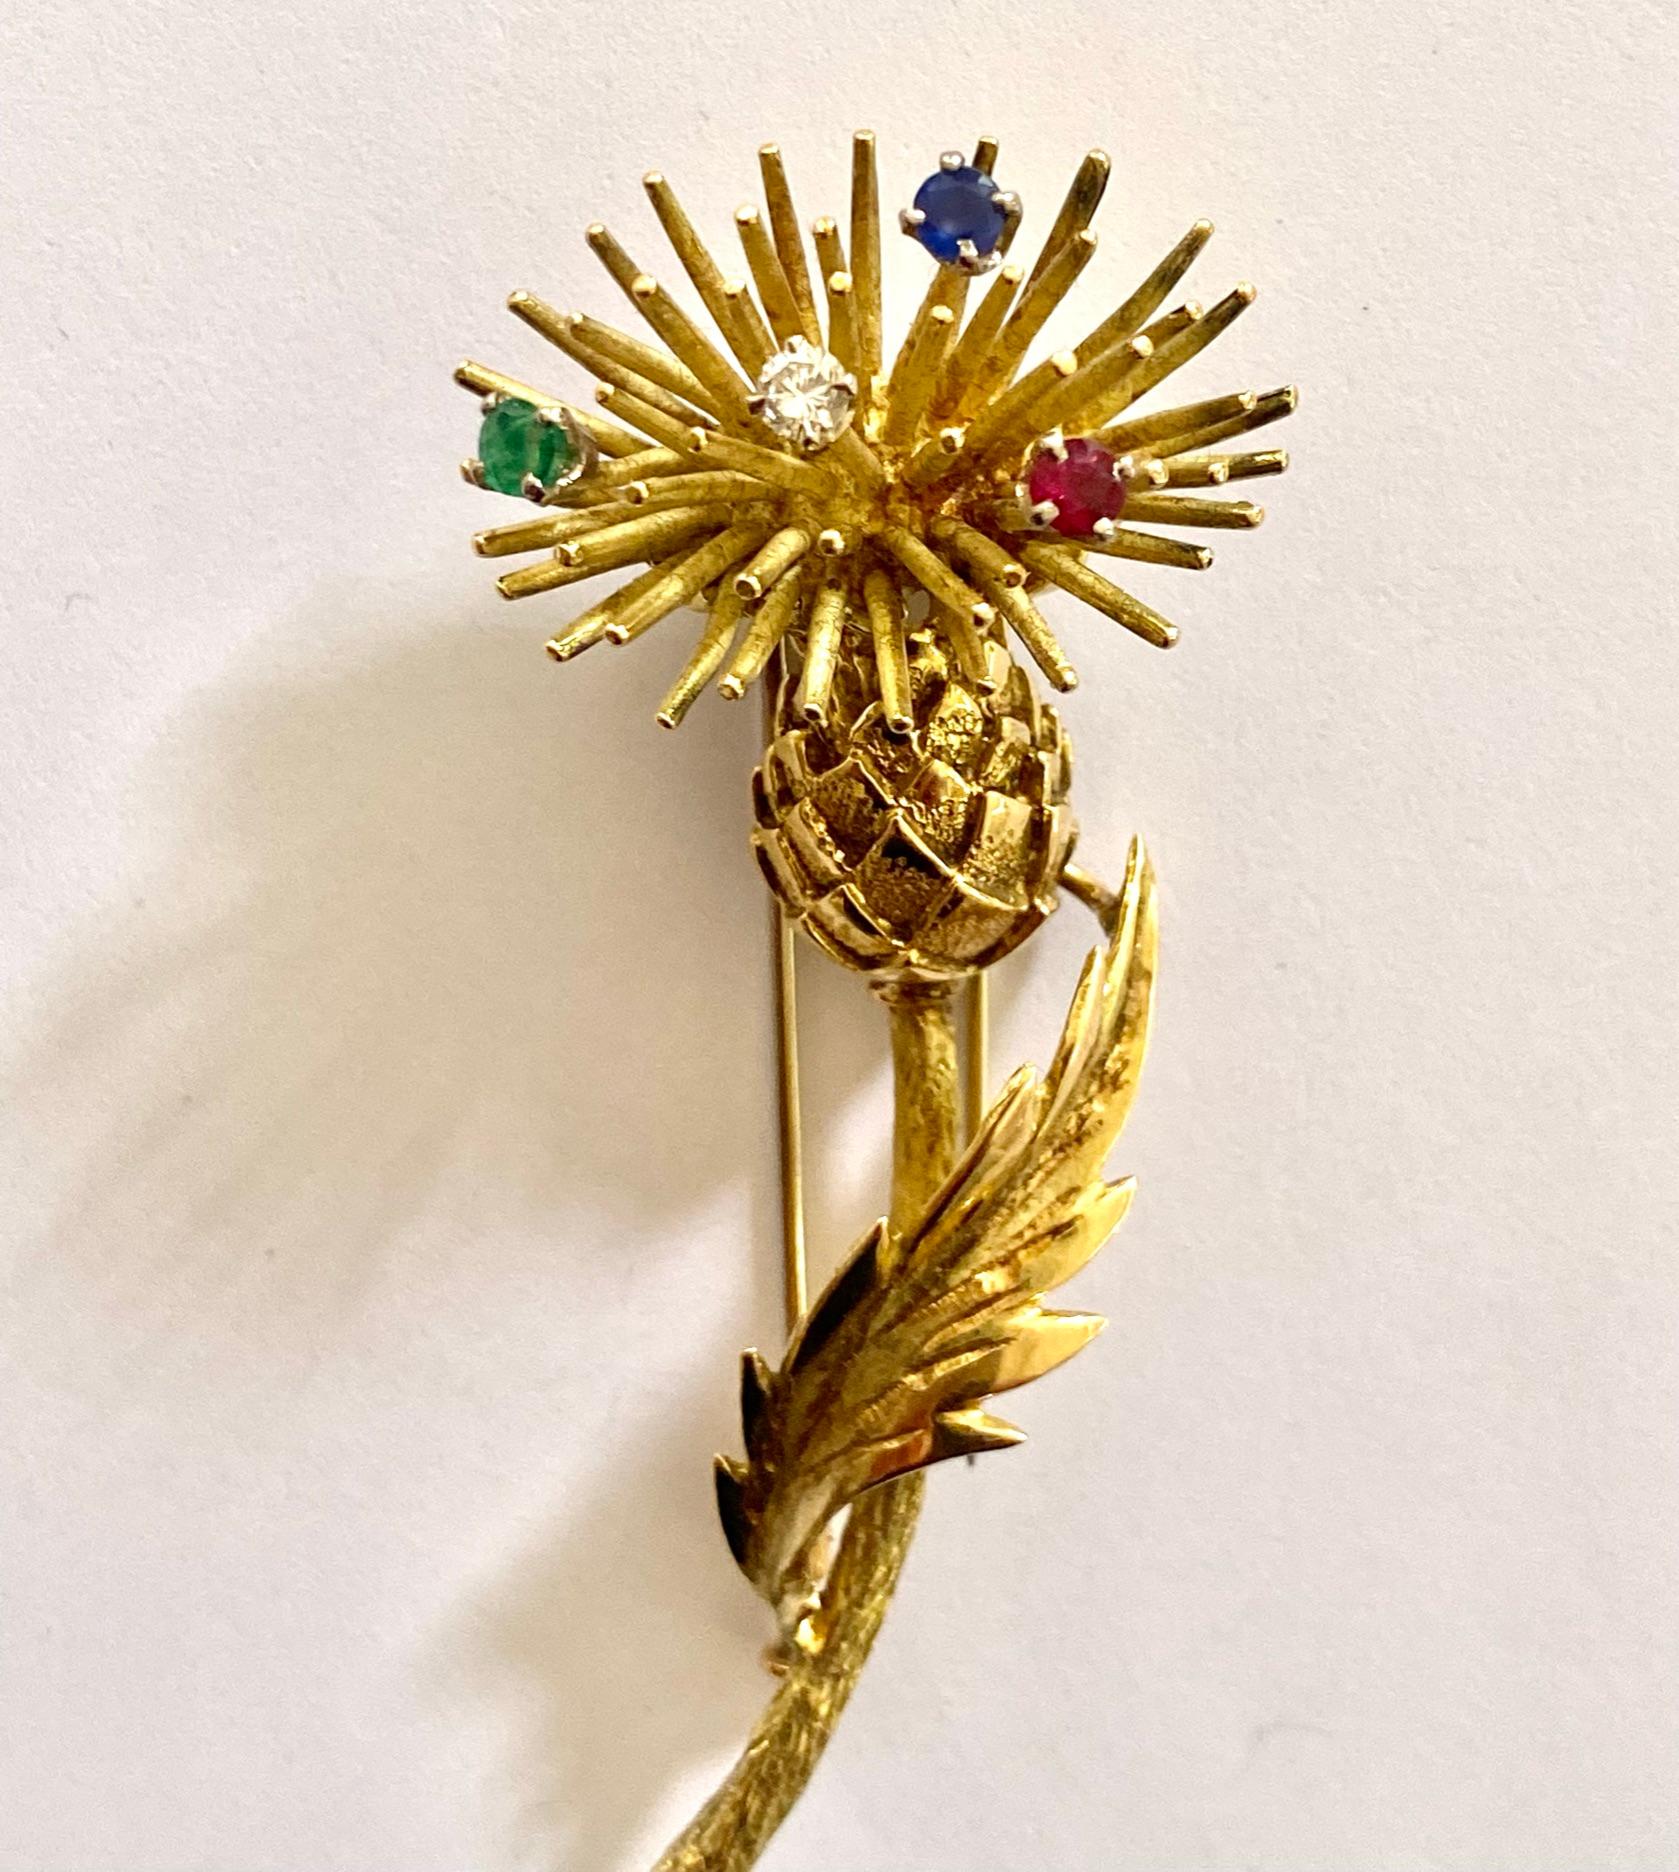 18K. yellow gold brooch in the shape of a pineapple,
provided with French hallmarks from around 1960
Dimensions: 70 x 28 x 15 mm.
White gold double clip with safety clasp.
Set with 1 emerald, 1 sapphire, 1 ruby and 1 brilliant.
Weight: 18.22 grams